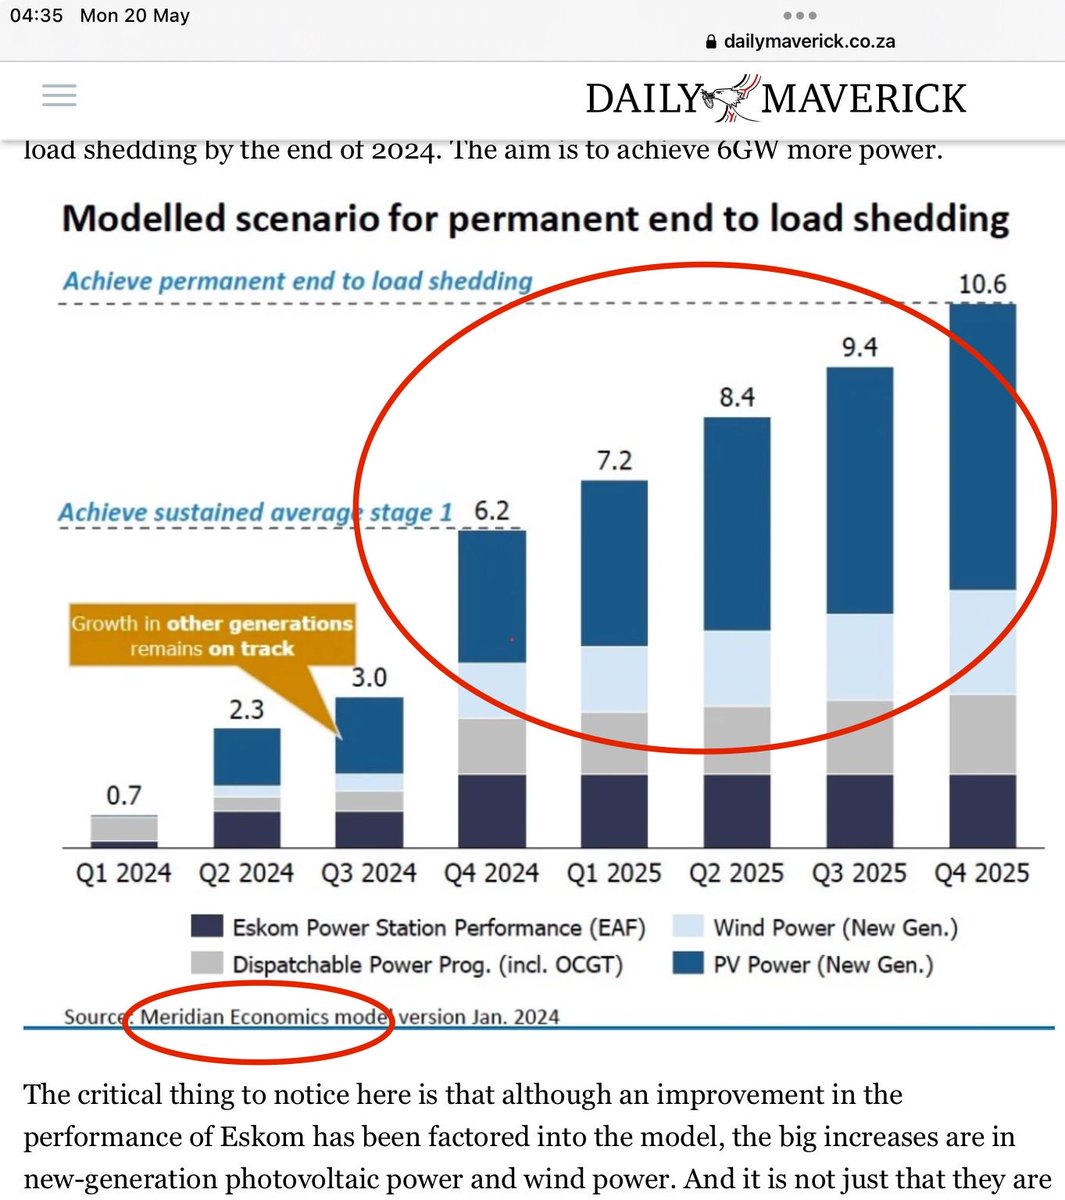 The reduction in load shedding is due to the improvement in performance of the ⁦@Eskom_SA⁩ coal fleet. Here, ⁦@dailymaverick⁩ & Meridian Economics trying to ‘steal’ Eskom’s success with engineering fallacies that permanent end to loadshedding will come from renewables